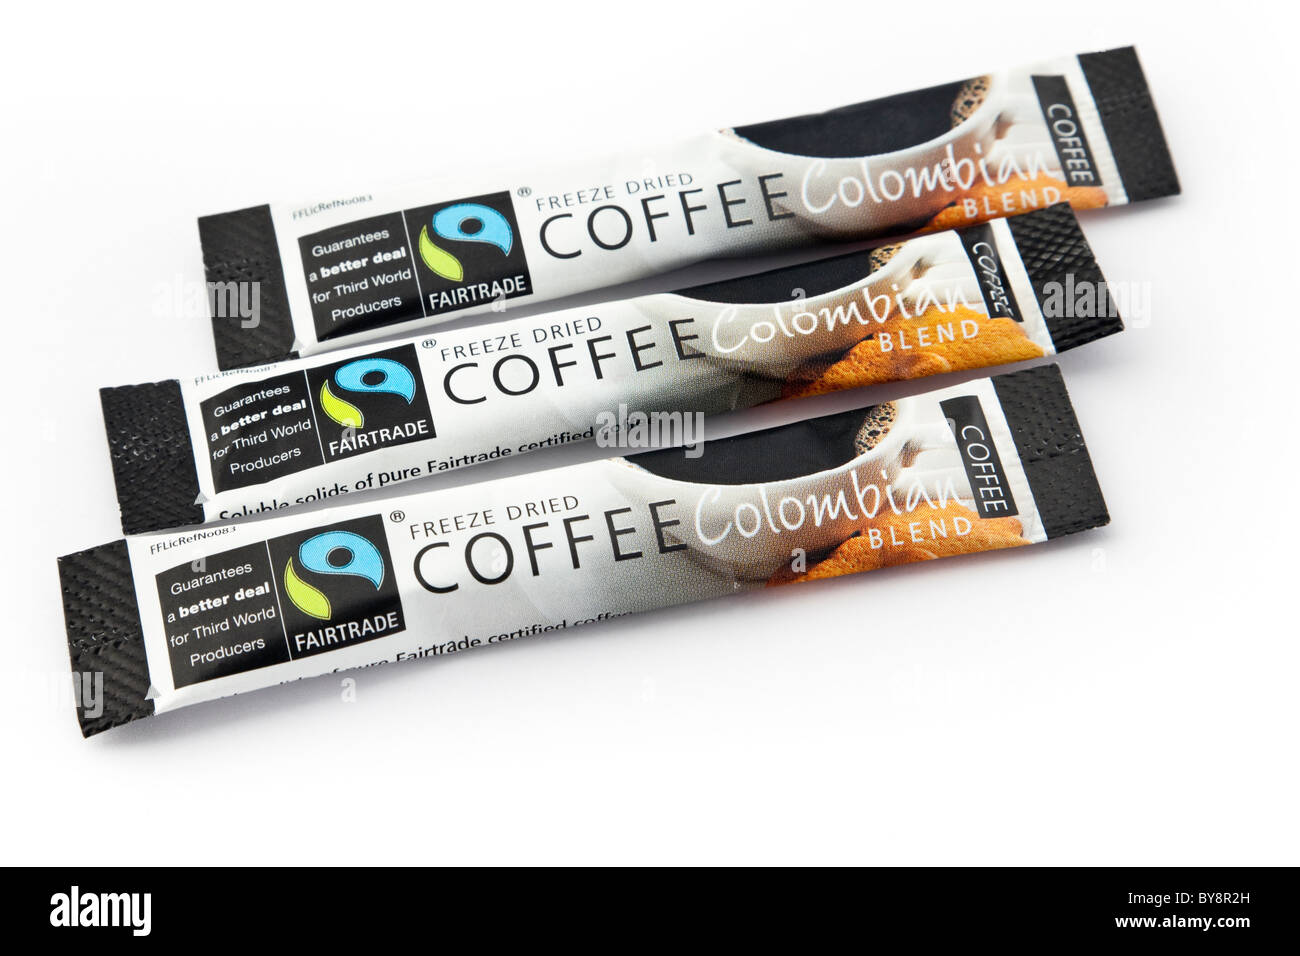 Fairtrade labels and logos on three individual servings of freeze dried Columbian instant coffee sachets on a white background. England UK Stock Photo